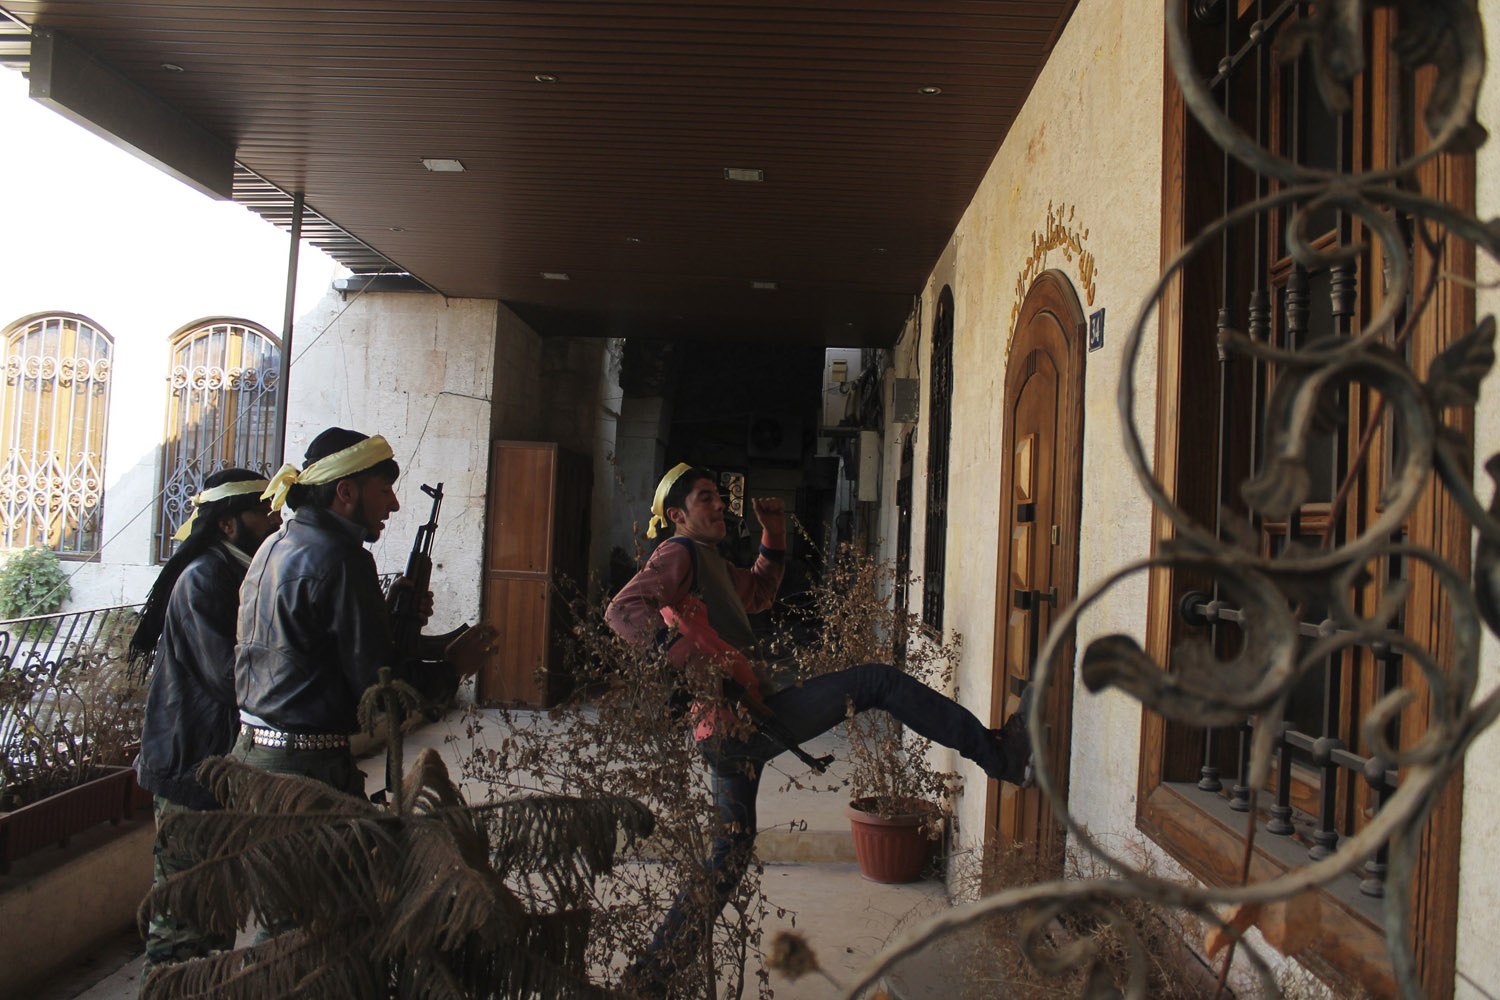 Members of the Free Syrian Army break into a house in the old city of Aleppo